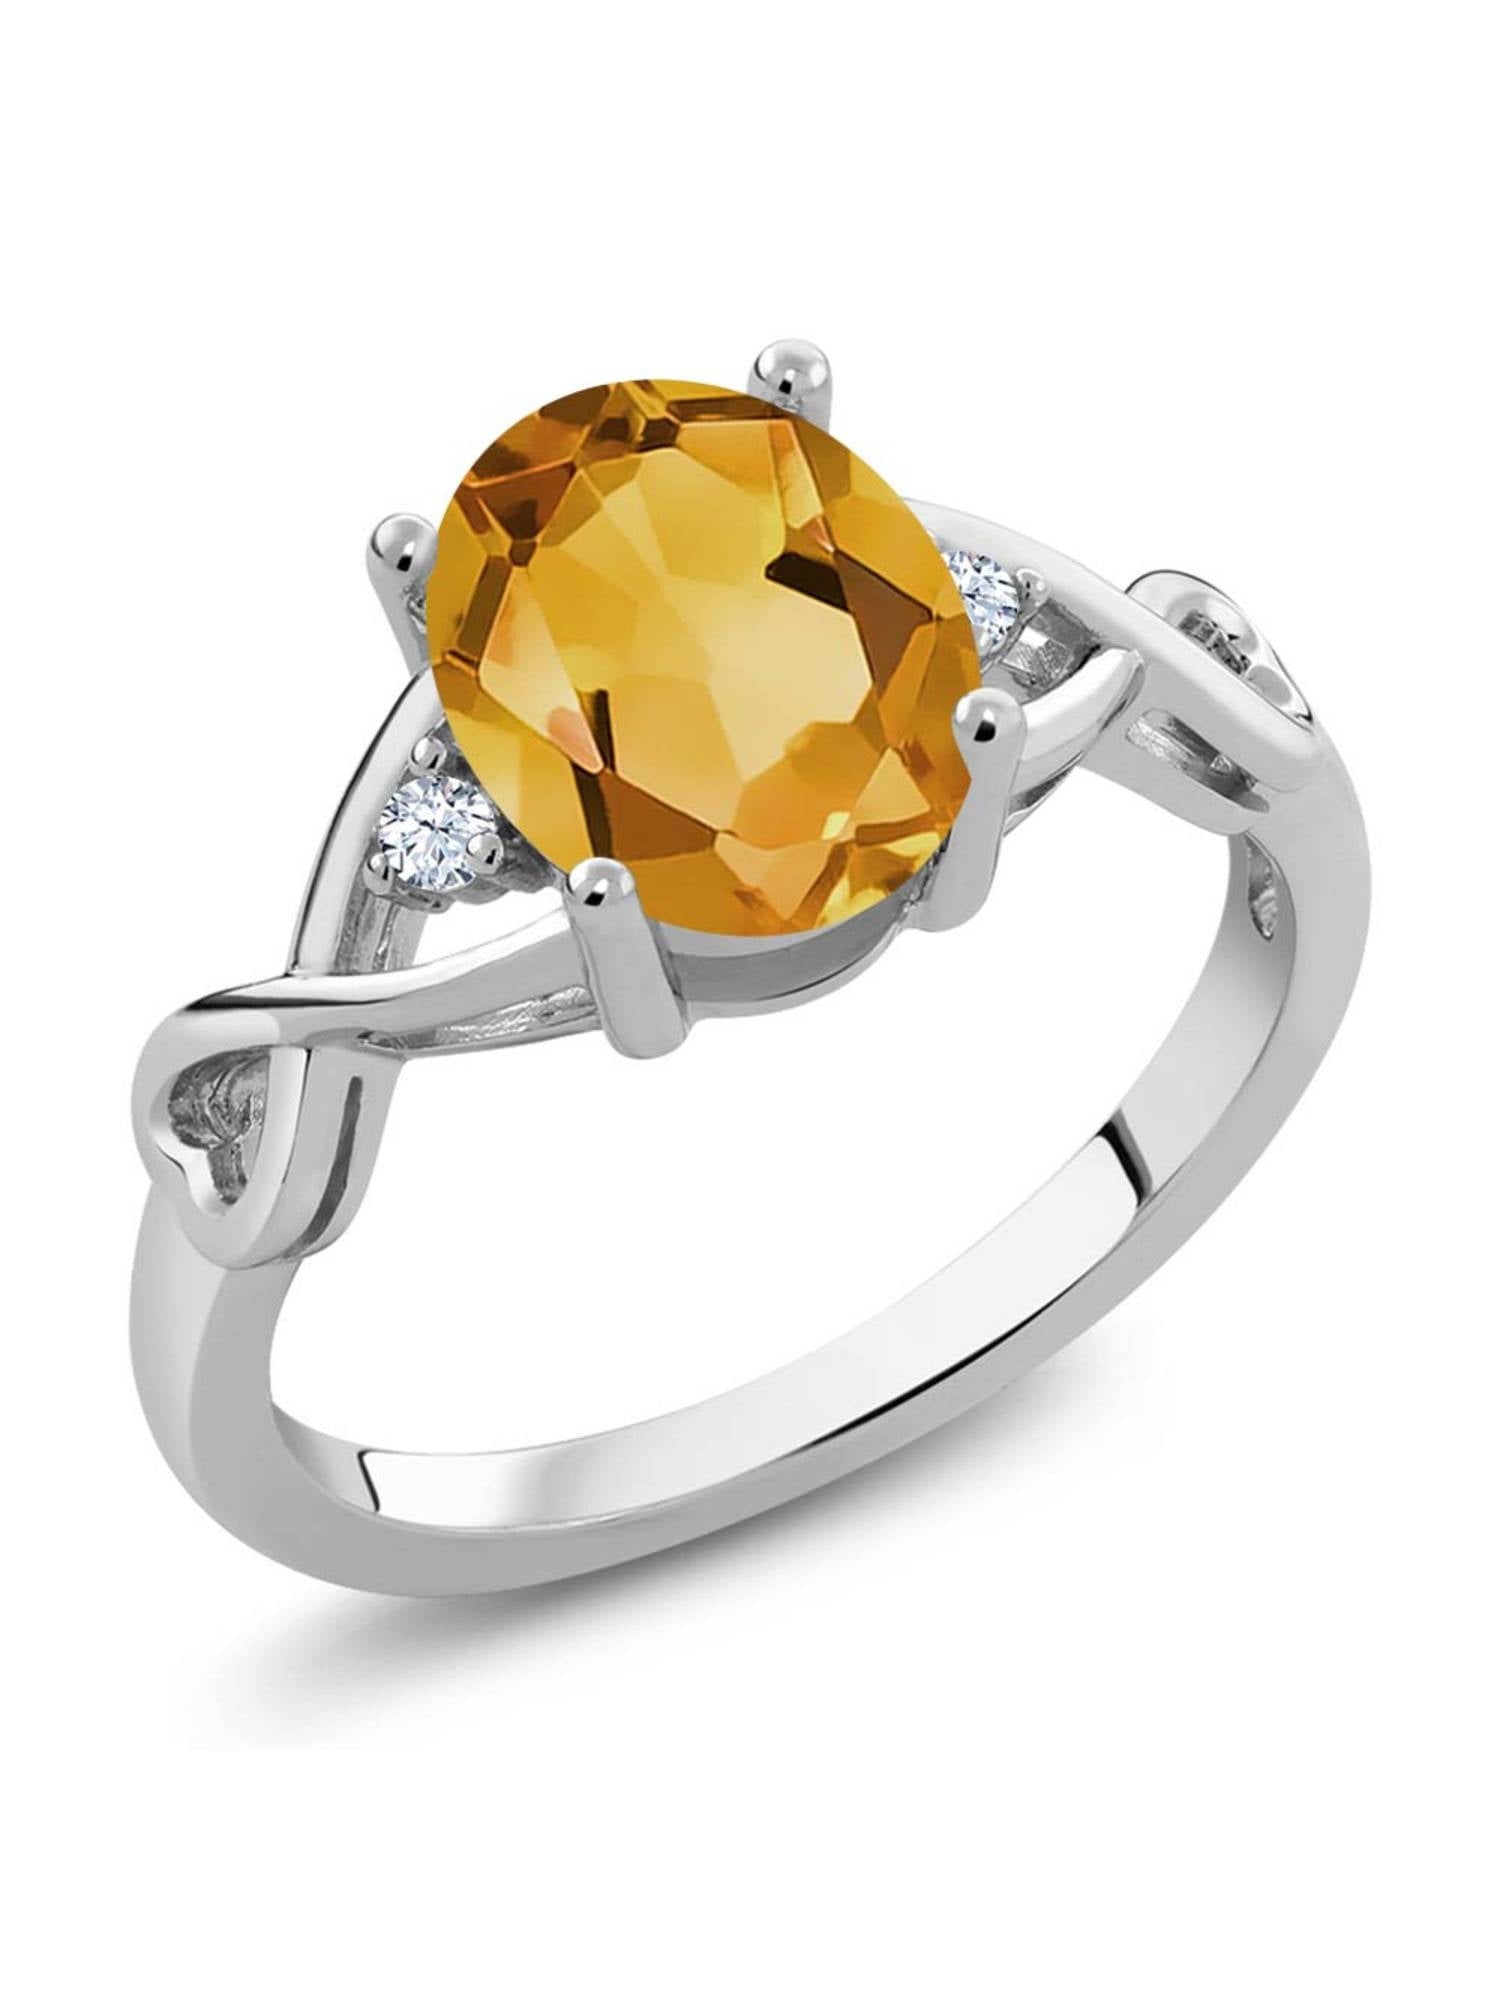 Exclusive NATURAL GOLDEN TOPAZ Gemstone Ring Birthstone Ring 925 Sterling  Silver — Discovered